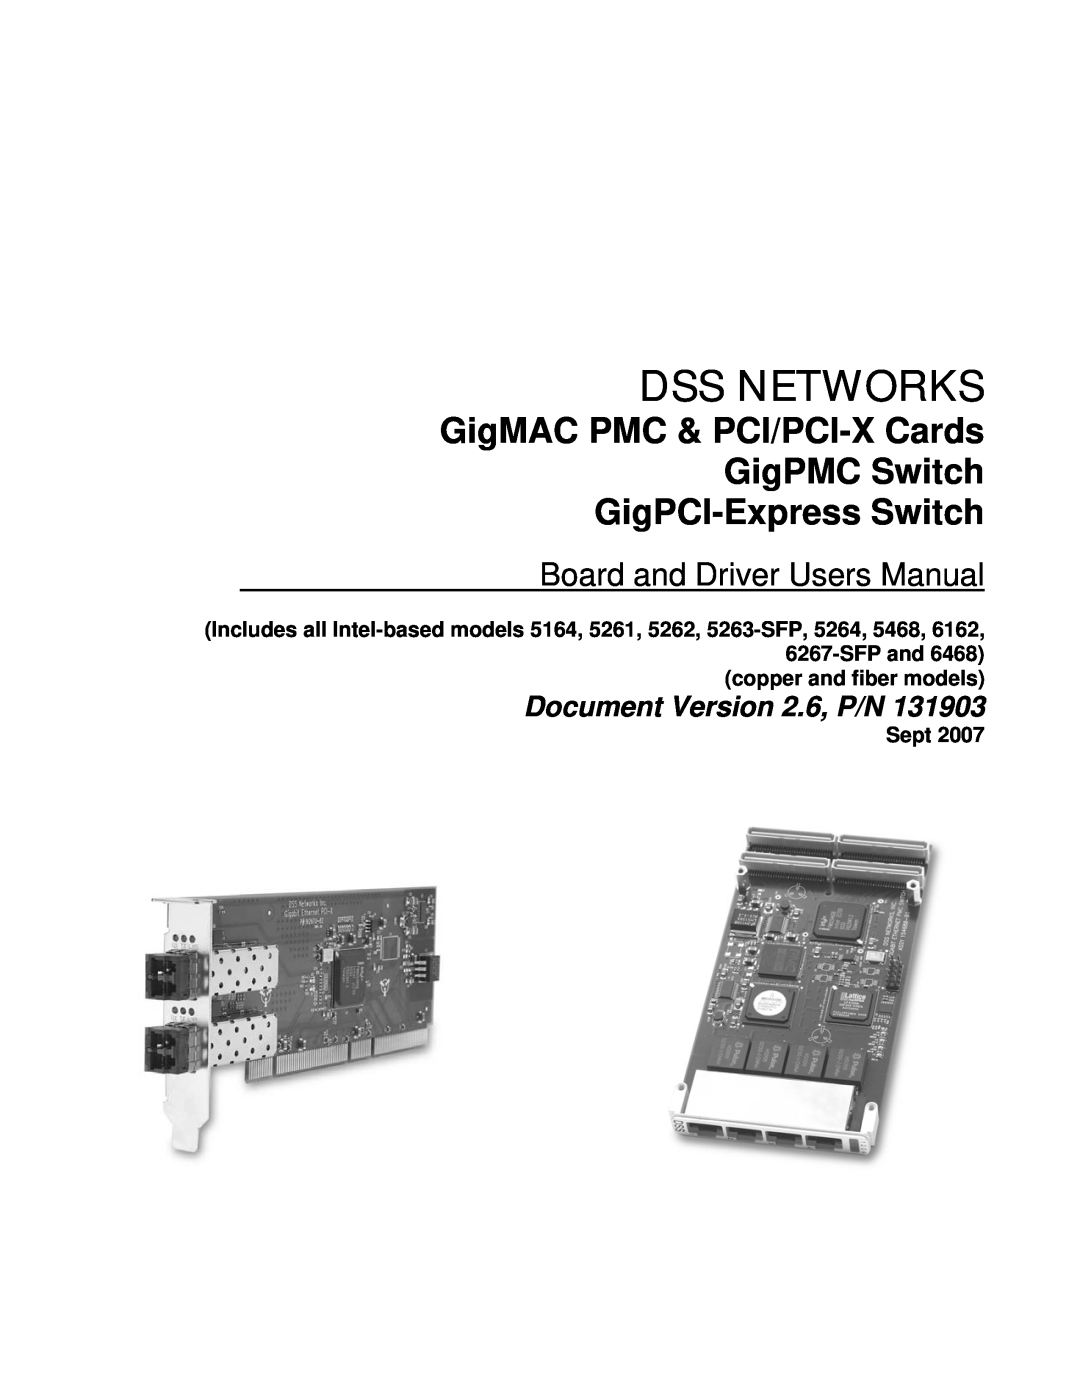 Intel user manual Dss Networks, GigMAC PMC & PCI/PCI-XCards GigPMC Switch, GigPCI-ExpressSwitch, Sept 